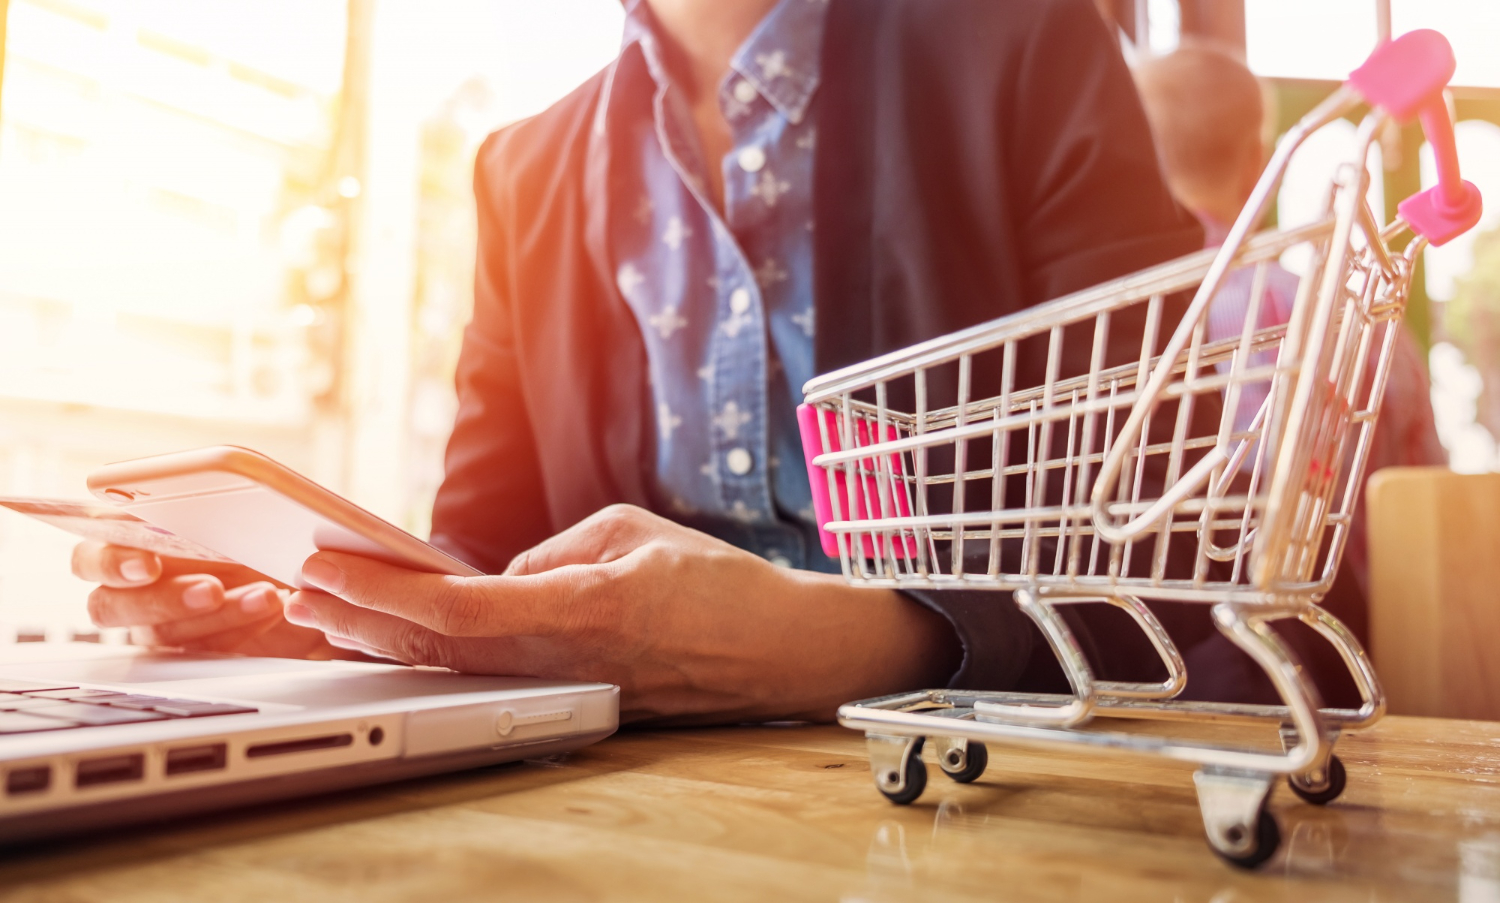 2021 E-commerce Trends You Need to Focus On